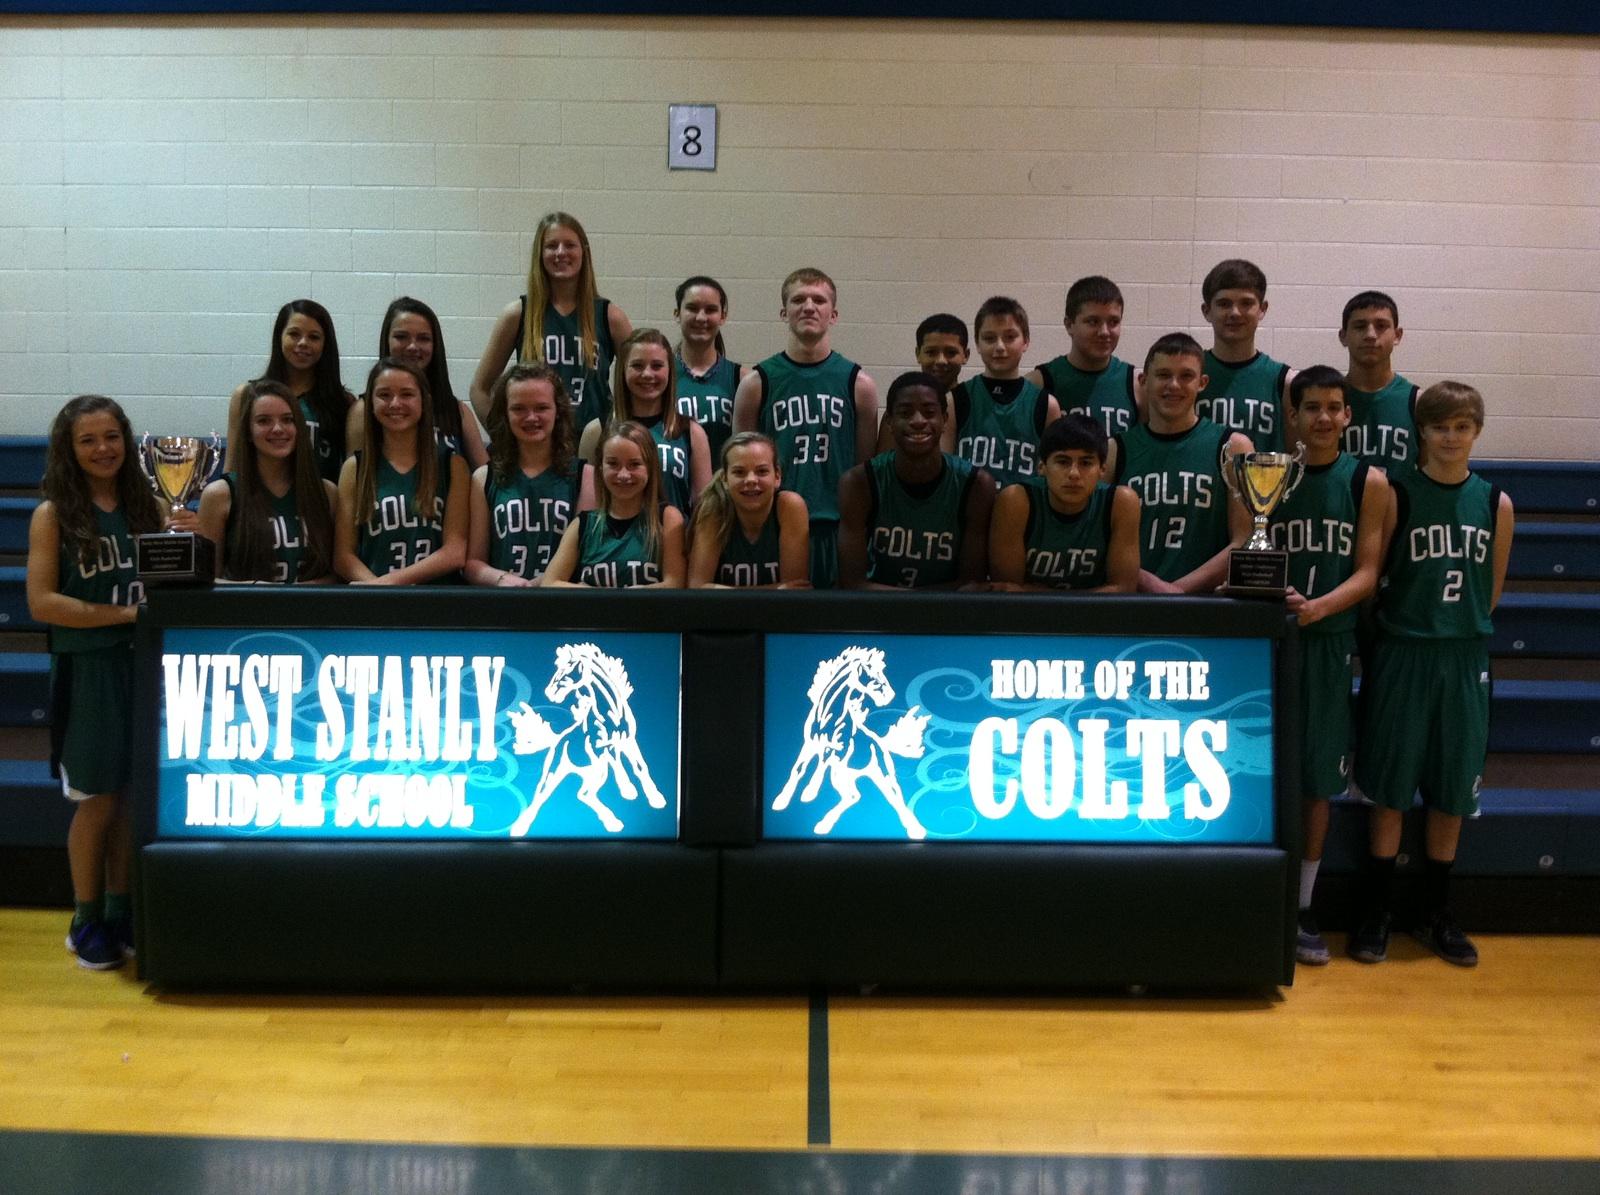 West Stanly Middle School